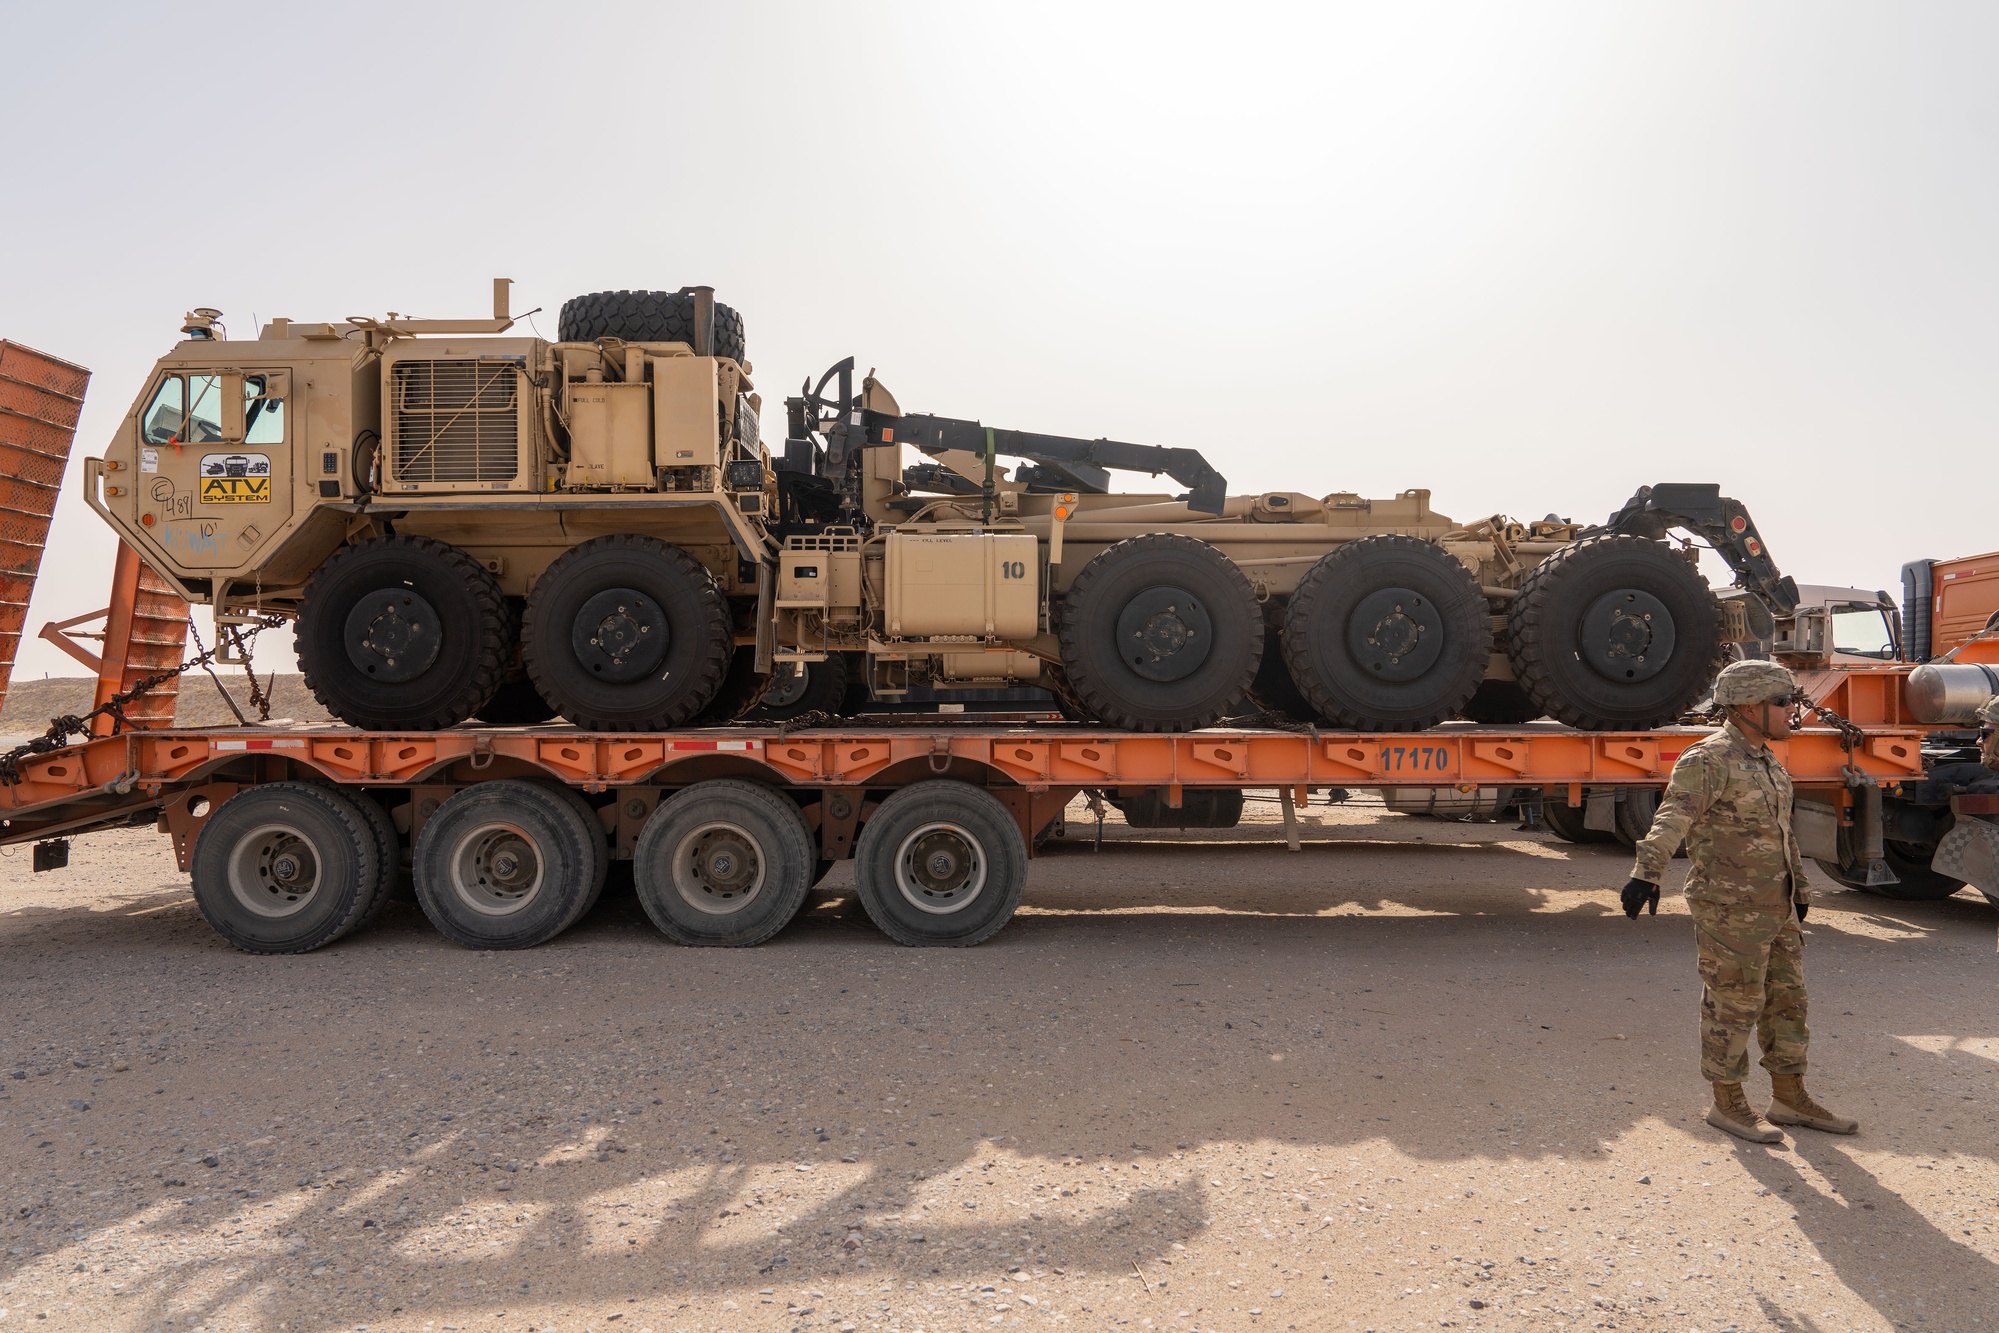 Images - Autonomous Vehicle unloaded by Charlie Company 142nd DSSB Image 7 of 8